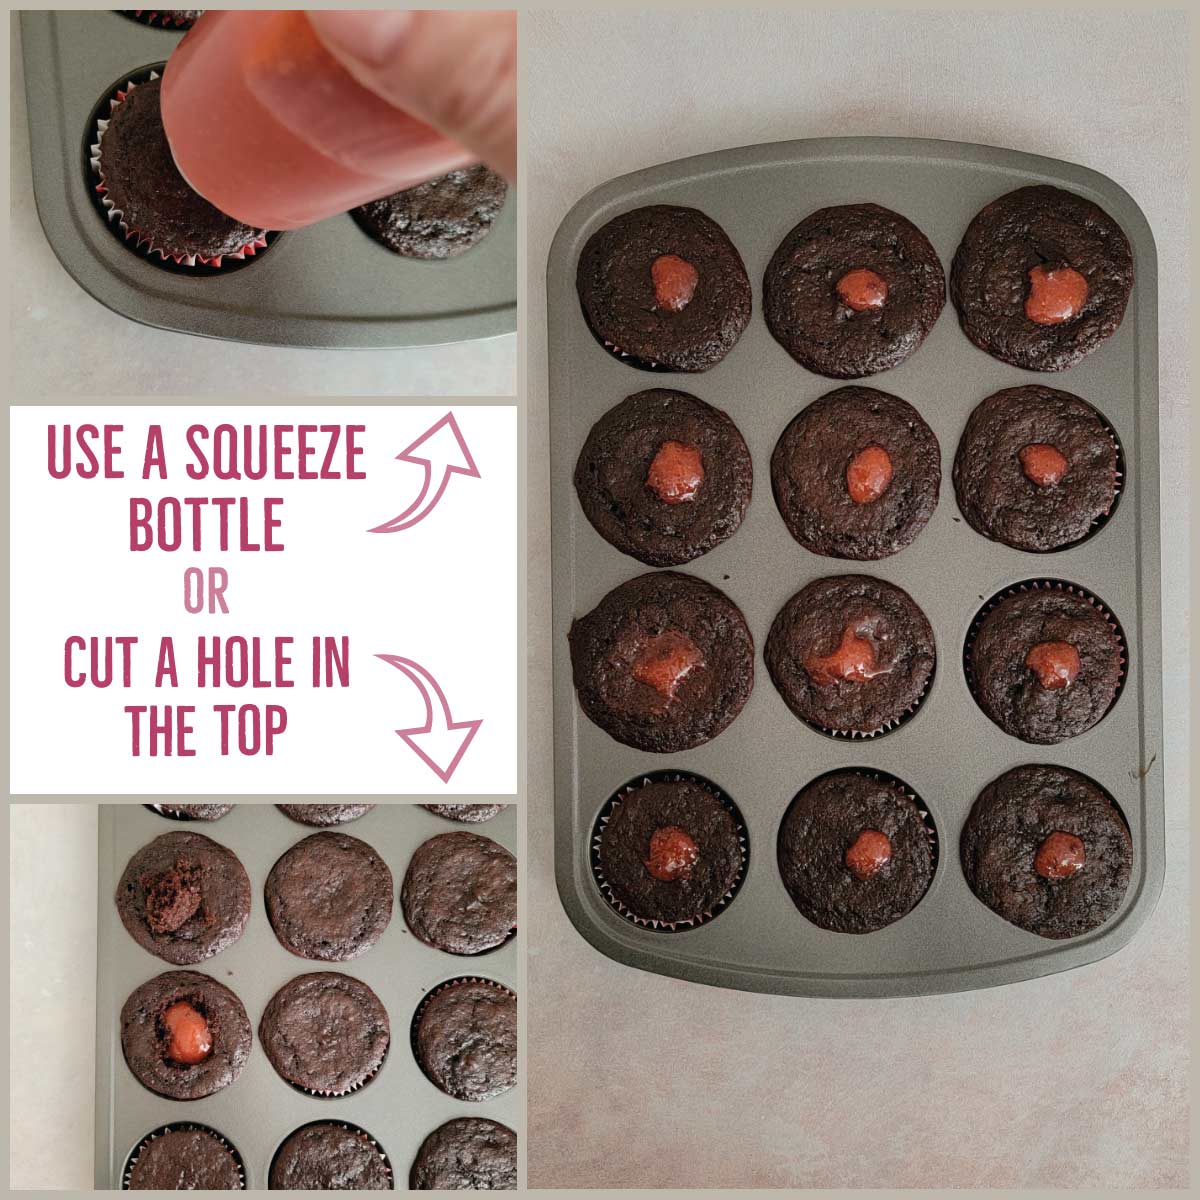 Use a squeeze bottle with a picture of a bottle being used to fill cupcakes or cut a hole in the top with a picture of a hole cut out and strawberry filling added.